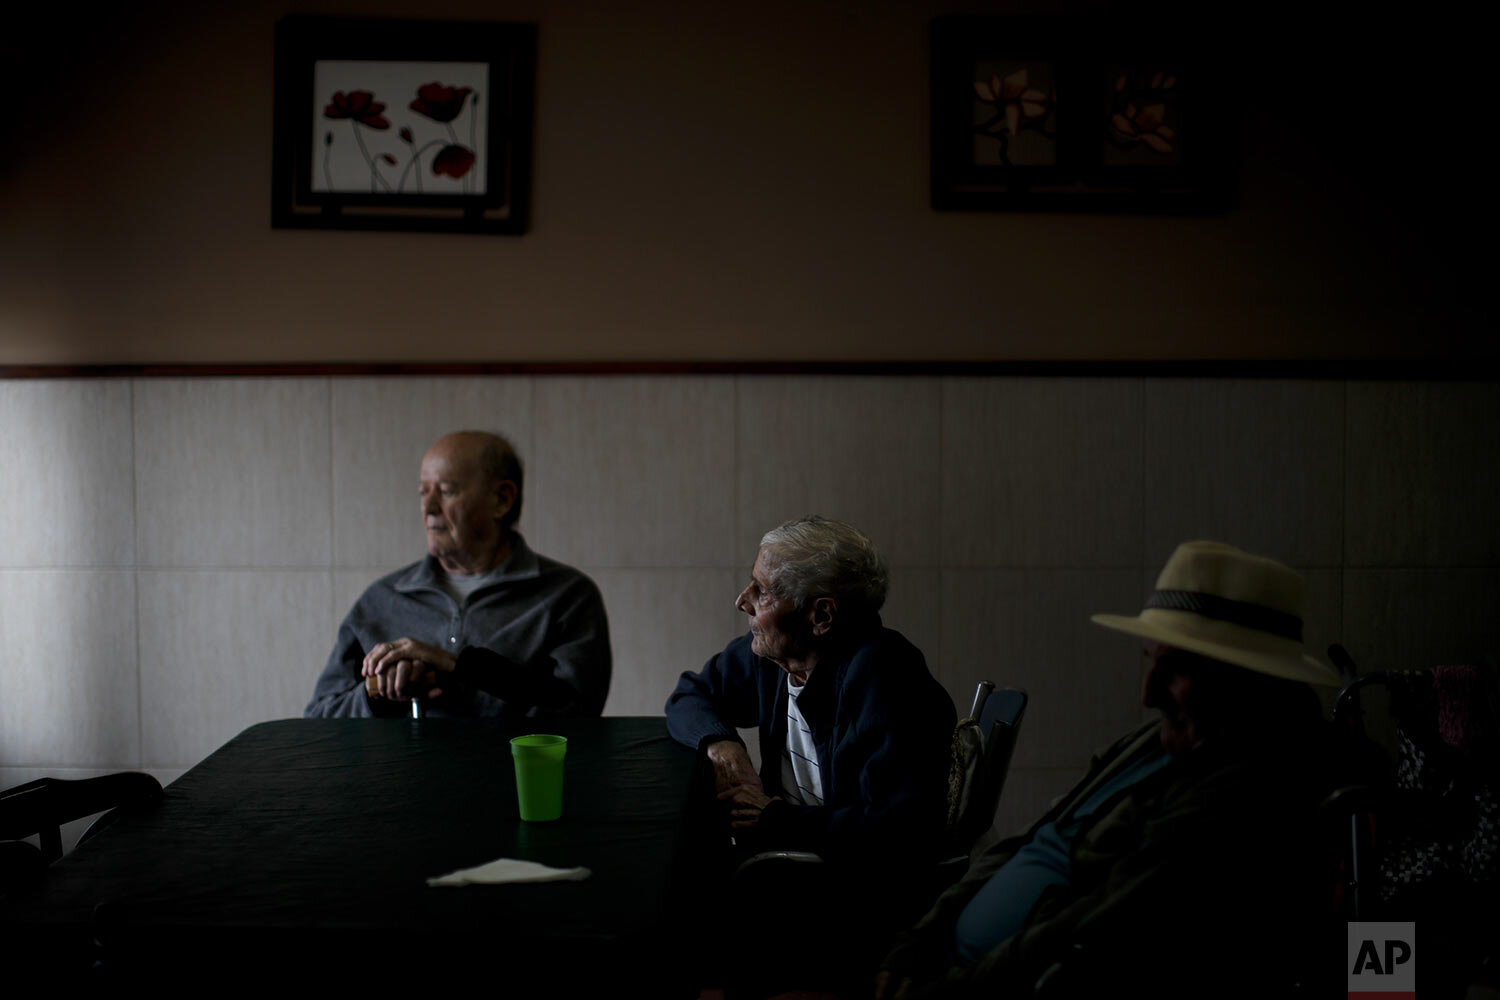  Fermin Urban, left, Victor Tripiana, center, and Pedro Aberastegui rest during a break between activities at the Reminiscencias residence for the elderly in Tandil, Argentina, Monday, April 5, 2021. (AP Photo/Natacha Pisarenko) 